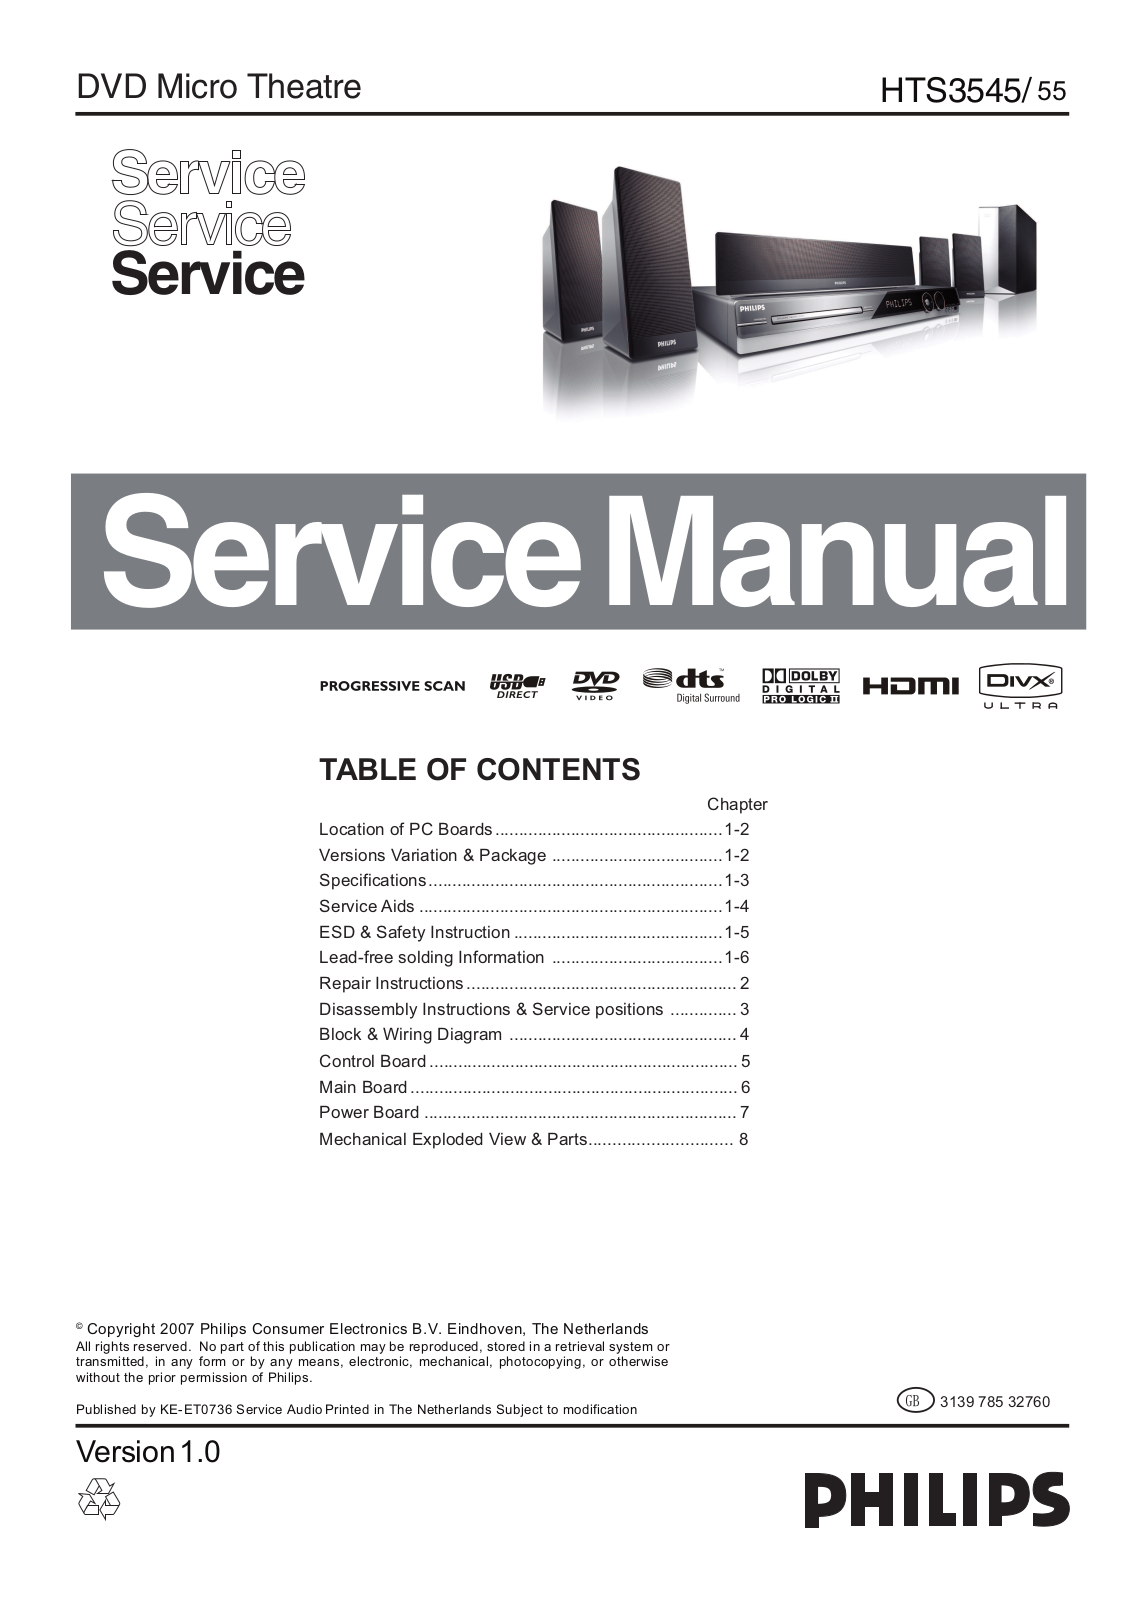 Philips HTS-3545 Service Manual